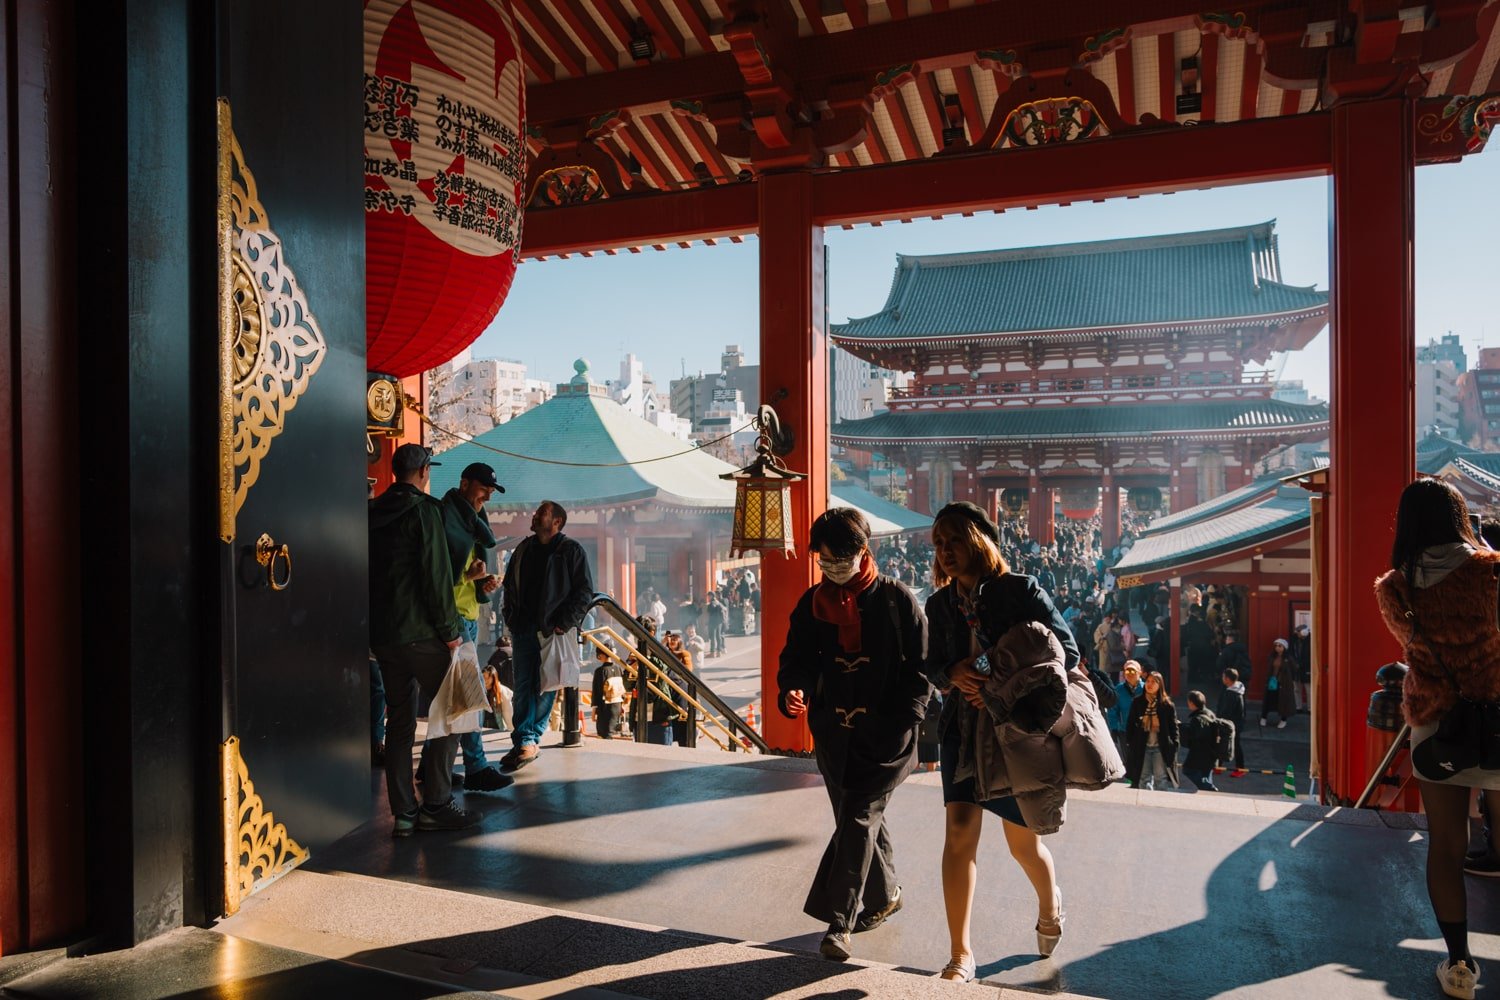 Locals and tourists at the Senso-ji Temple in Asakusa, Tokyo.